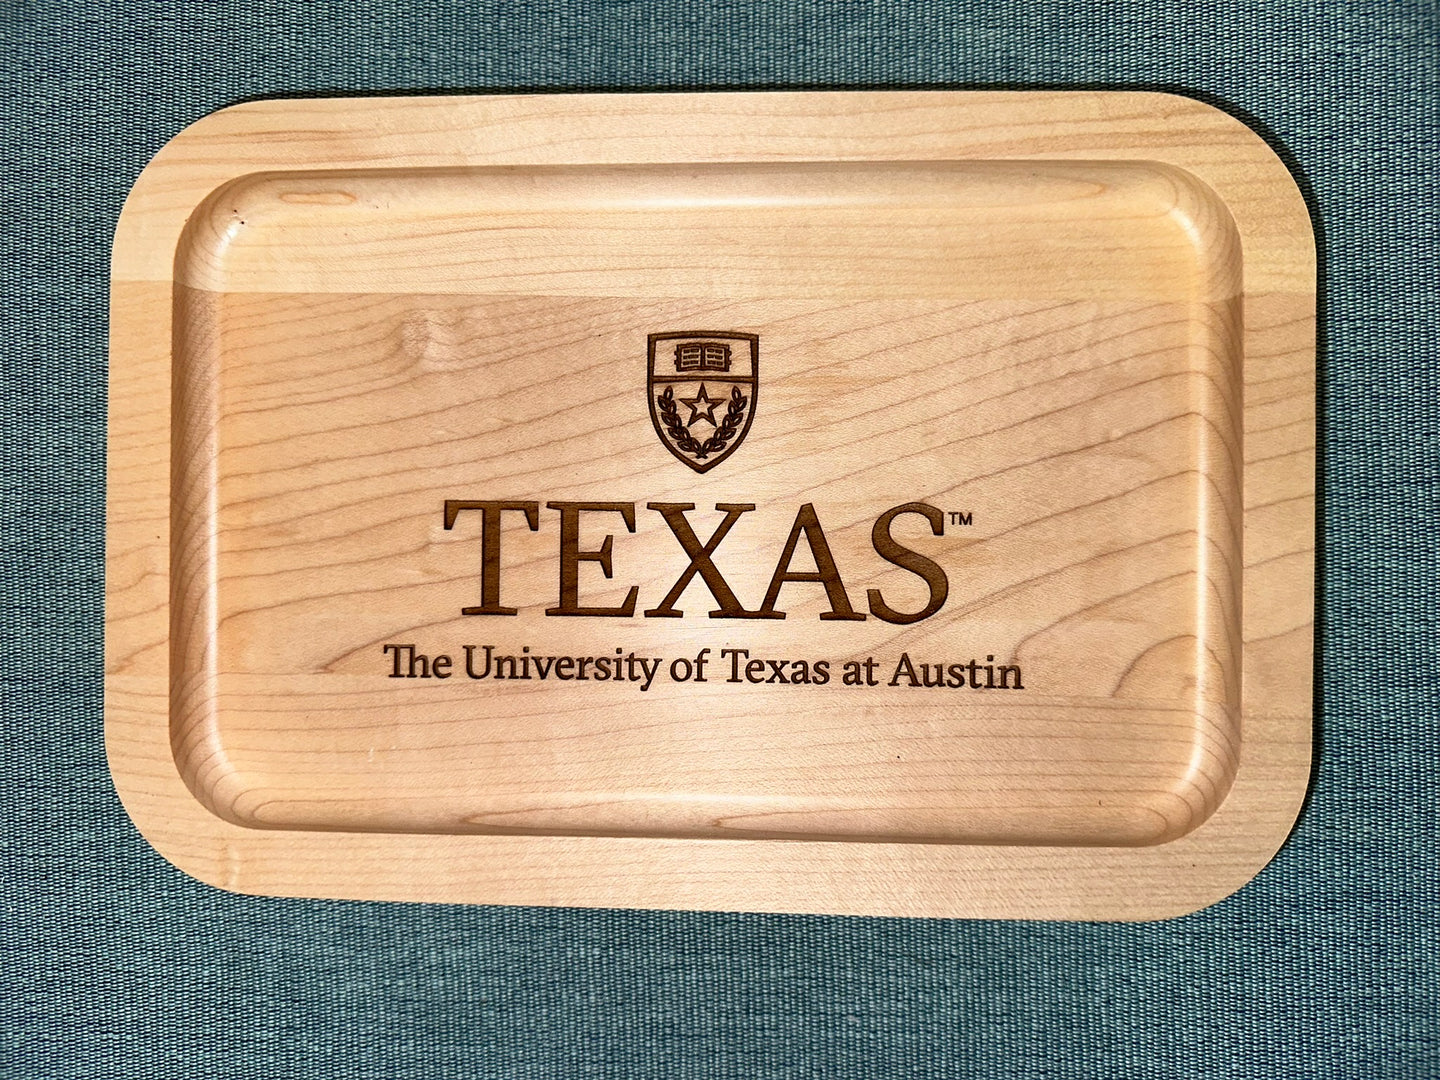 University of Texas at Austin Maple Wood Ring Tray with University Crest laying on black surface